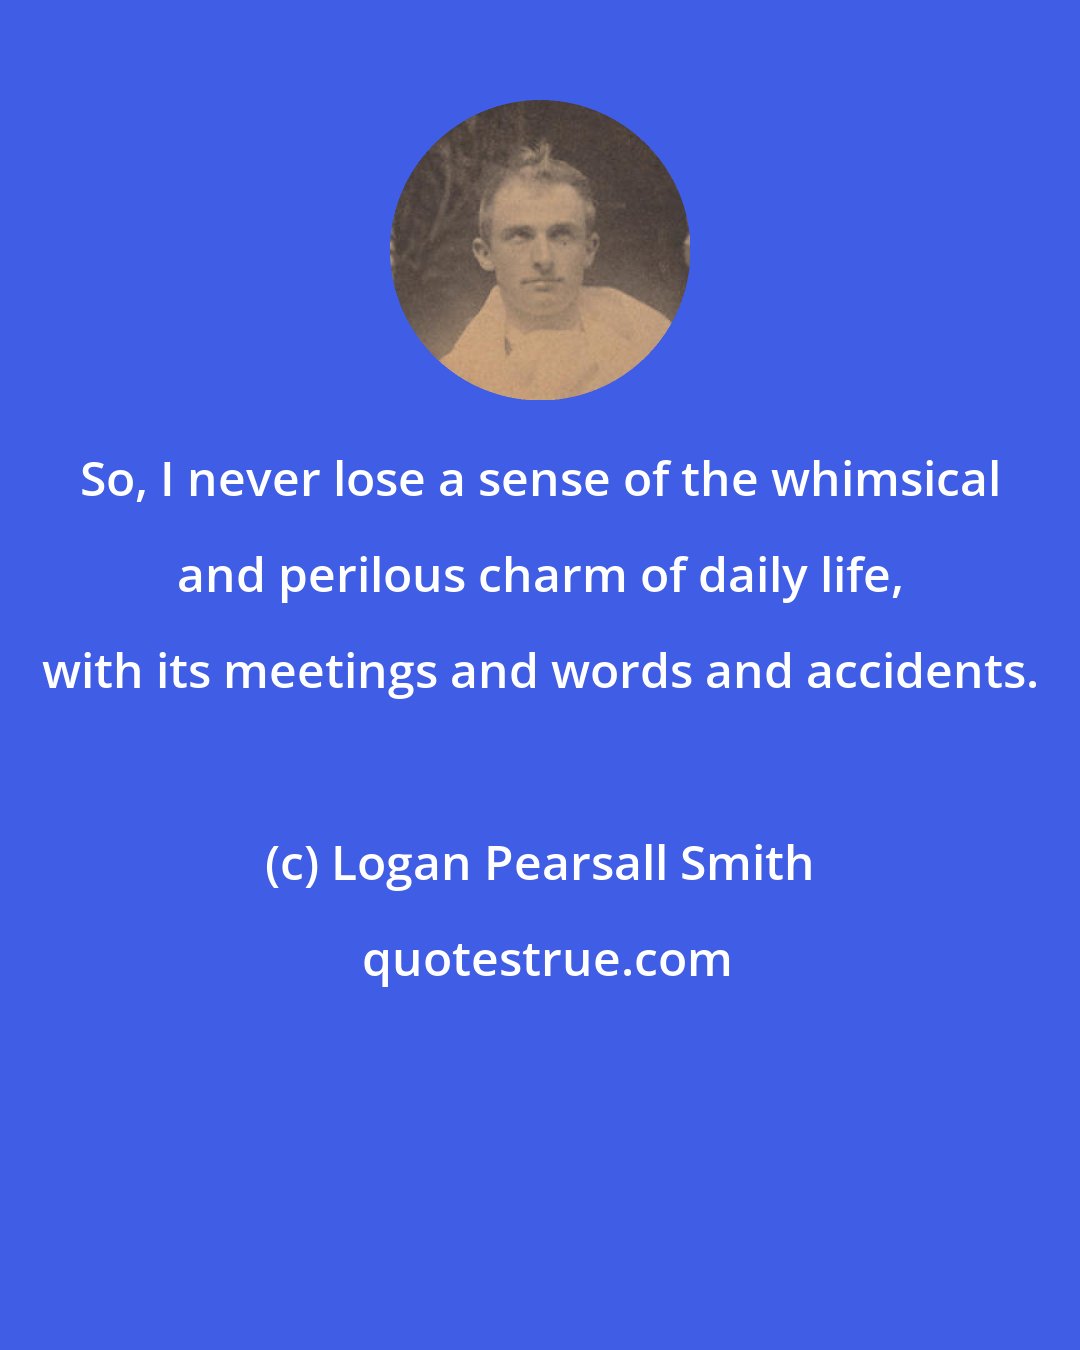 Logan Pearsall Smith: So, I never lose a sense of the whimsical and perilous charm of daily life, with its meetings and words and accidents.